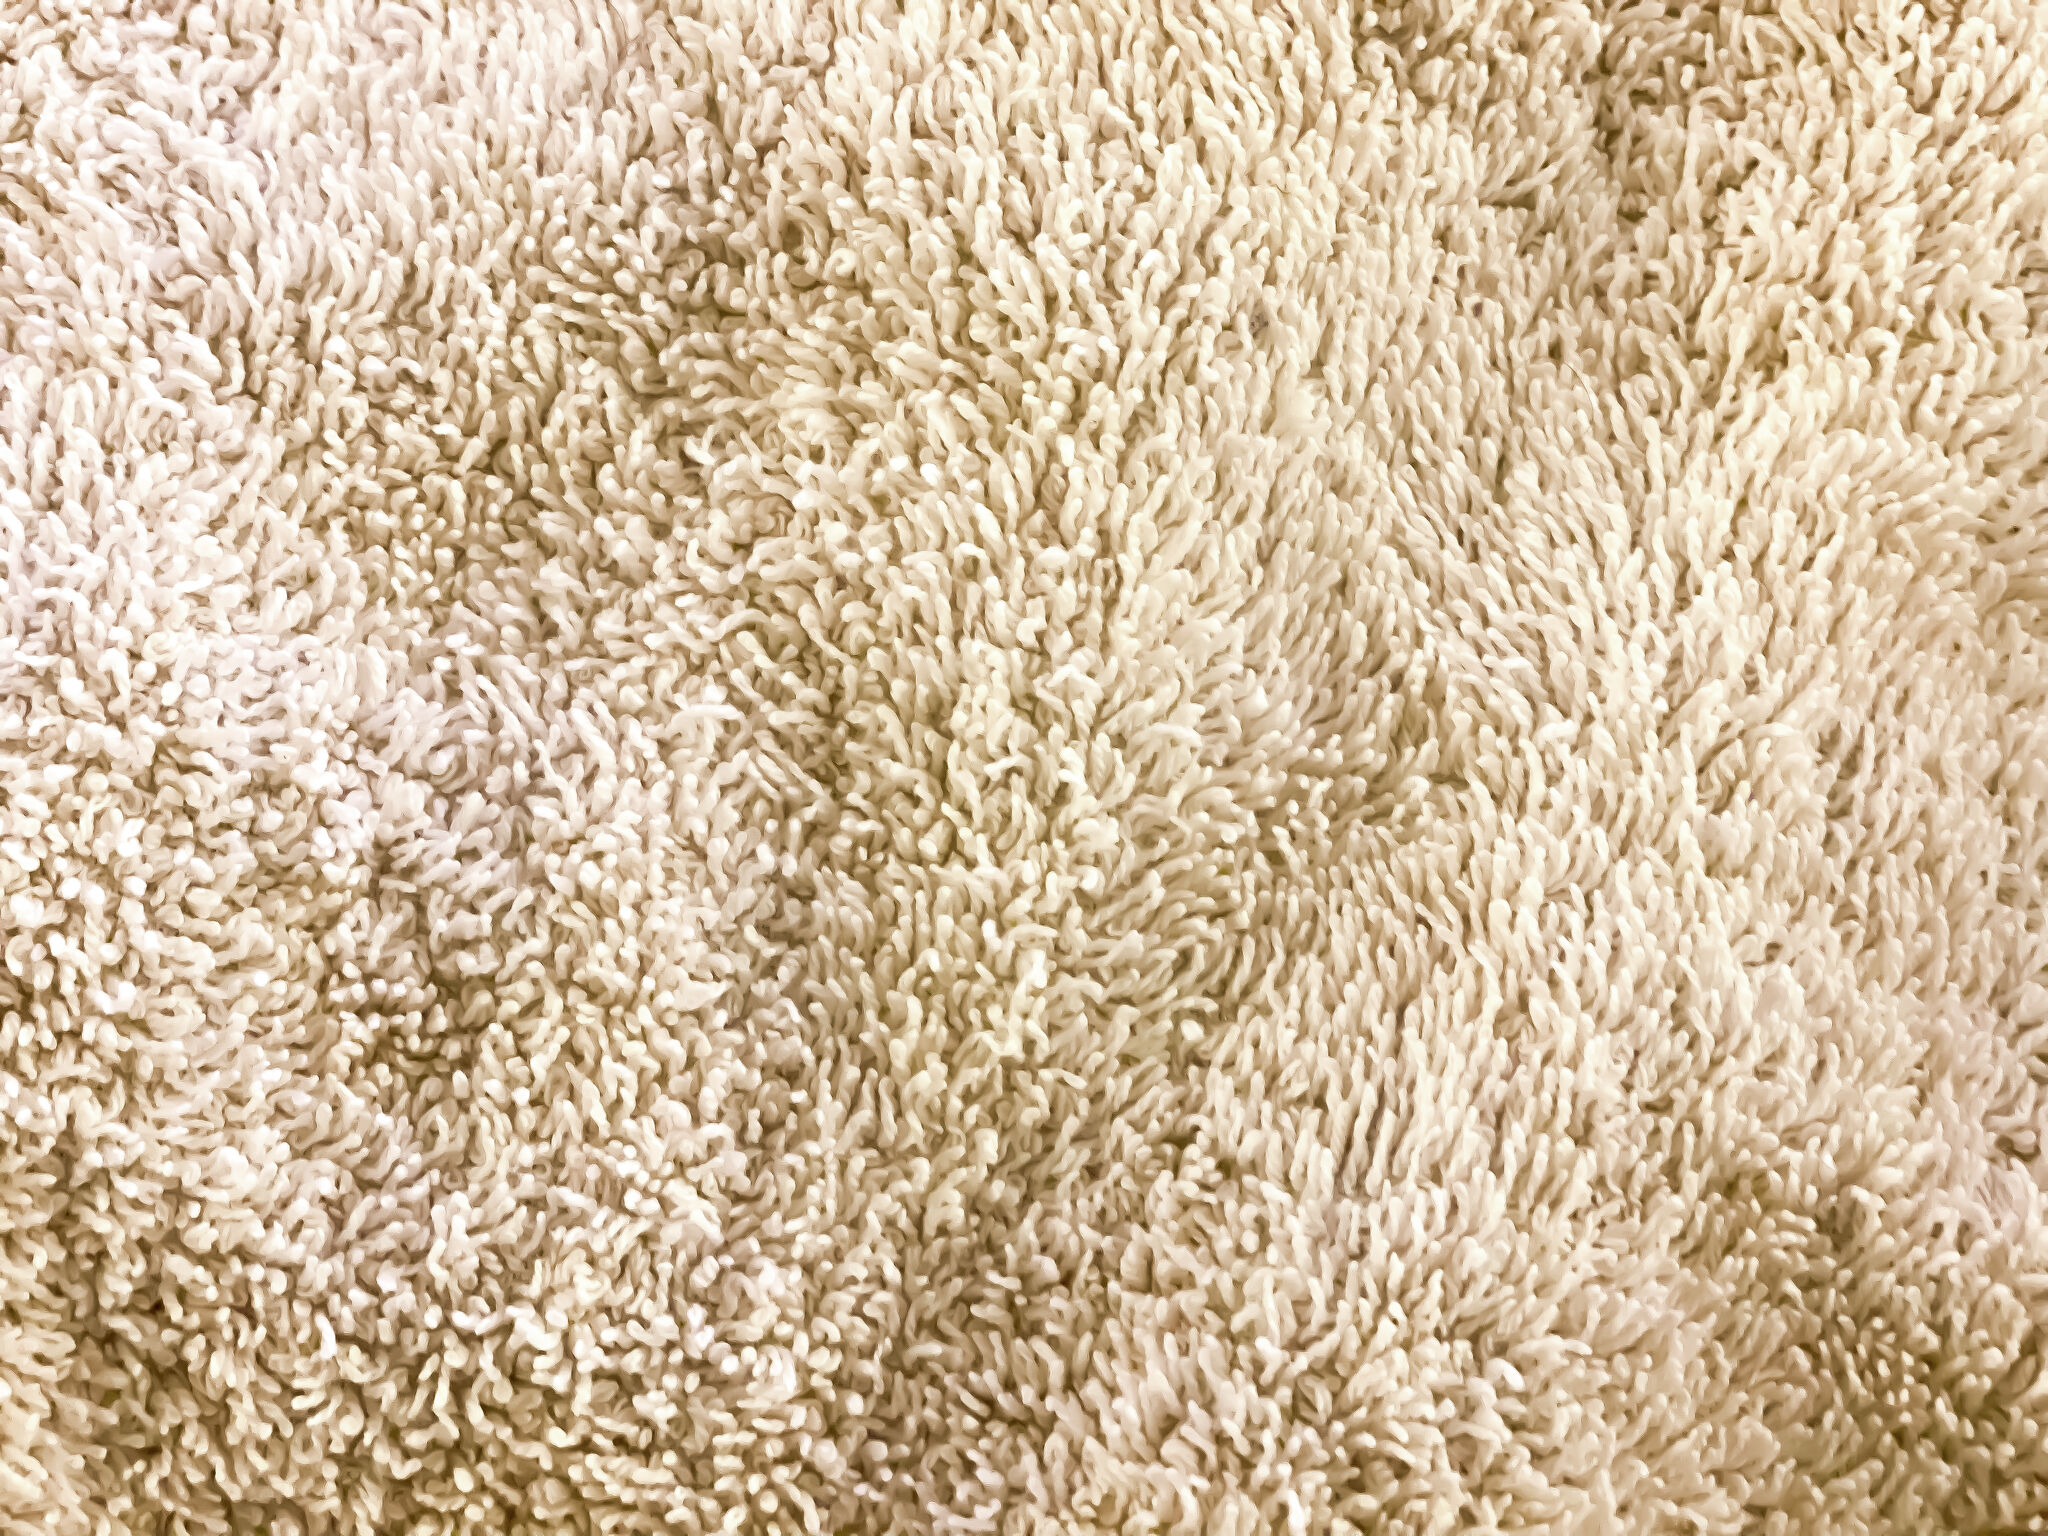 How to Remove Dog Pee & Other Pet Stains from Carpet — Naturally